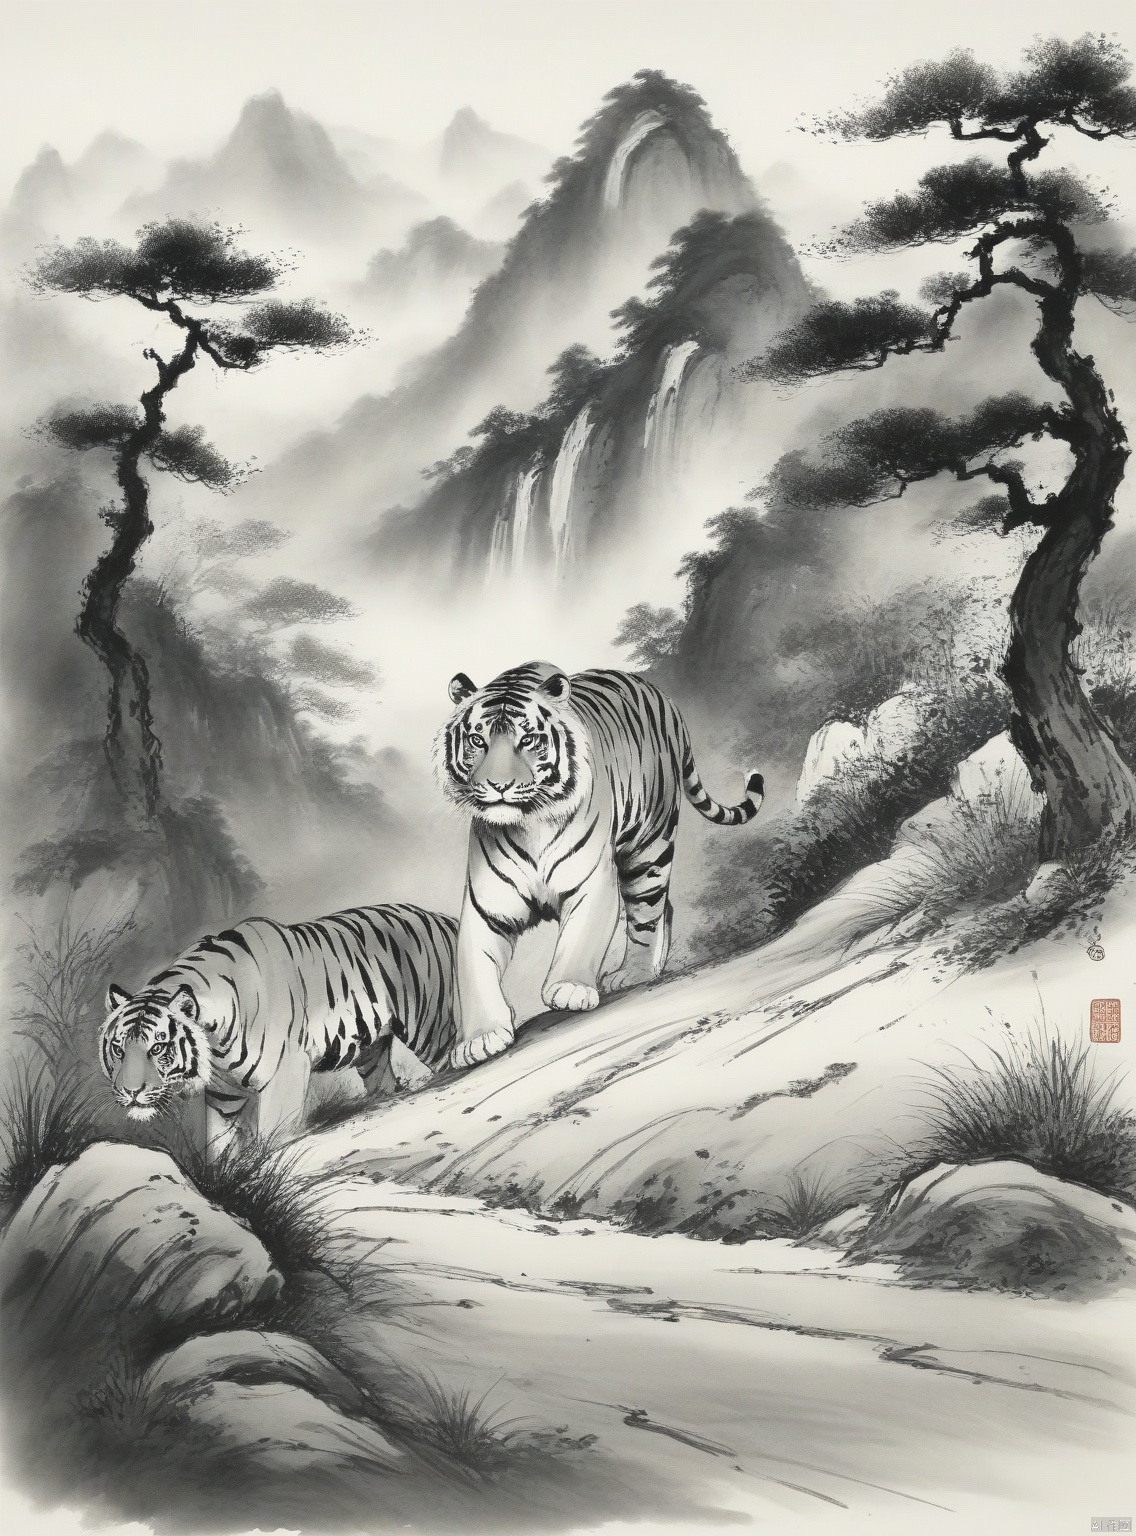  ((best quality)), ((masterpiece)), A giant, majestic tiger is walking down a hill, surrounded by trees, facing the camera, (Chinese ink style:1.1), (dynamic composition:1.2), (unfettered spirit:0.9)